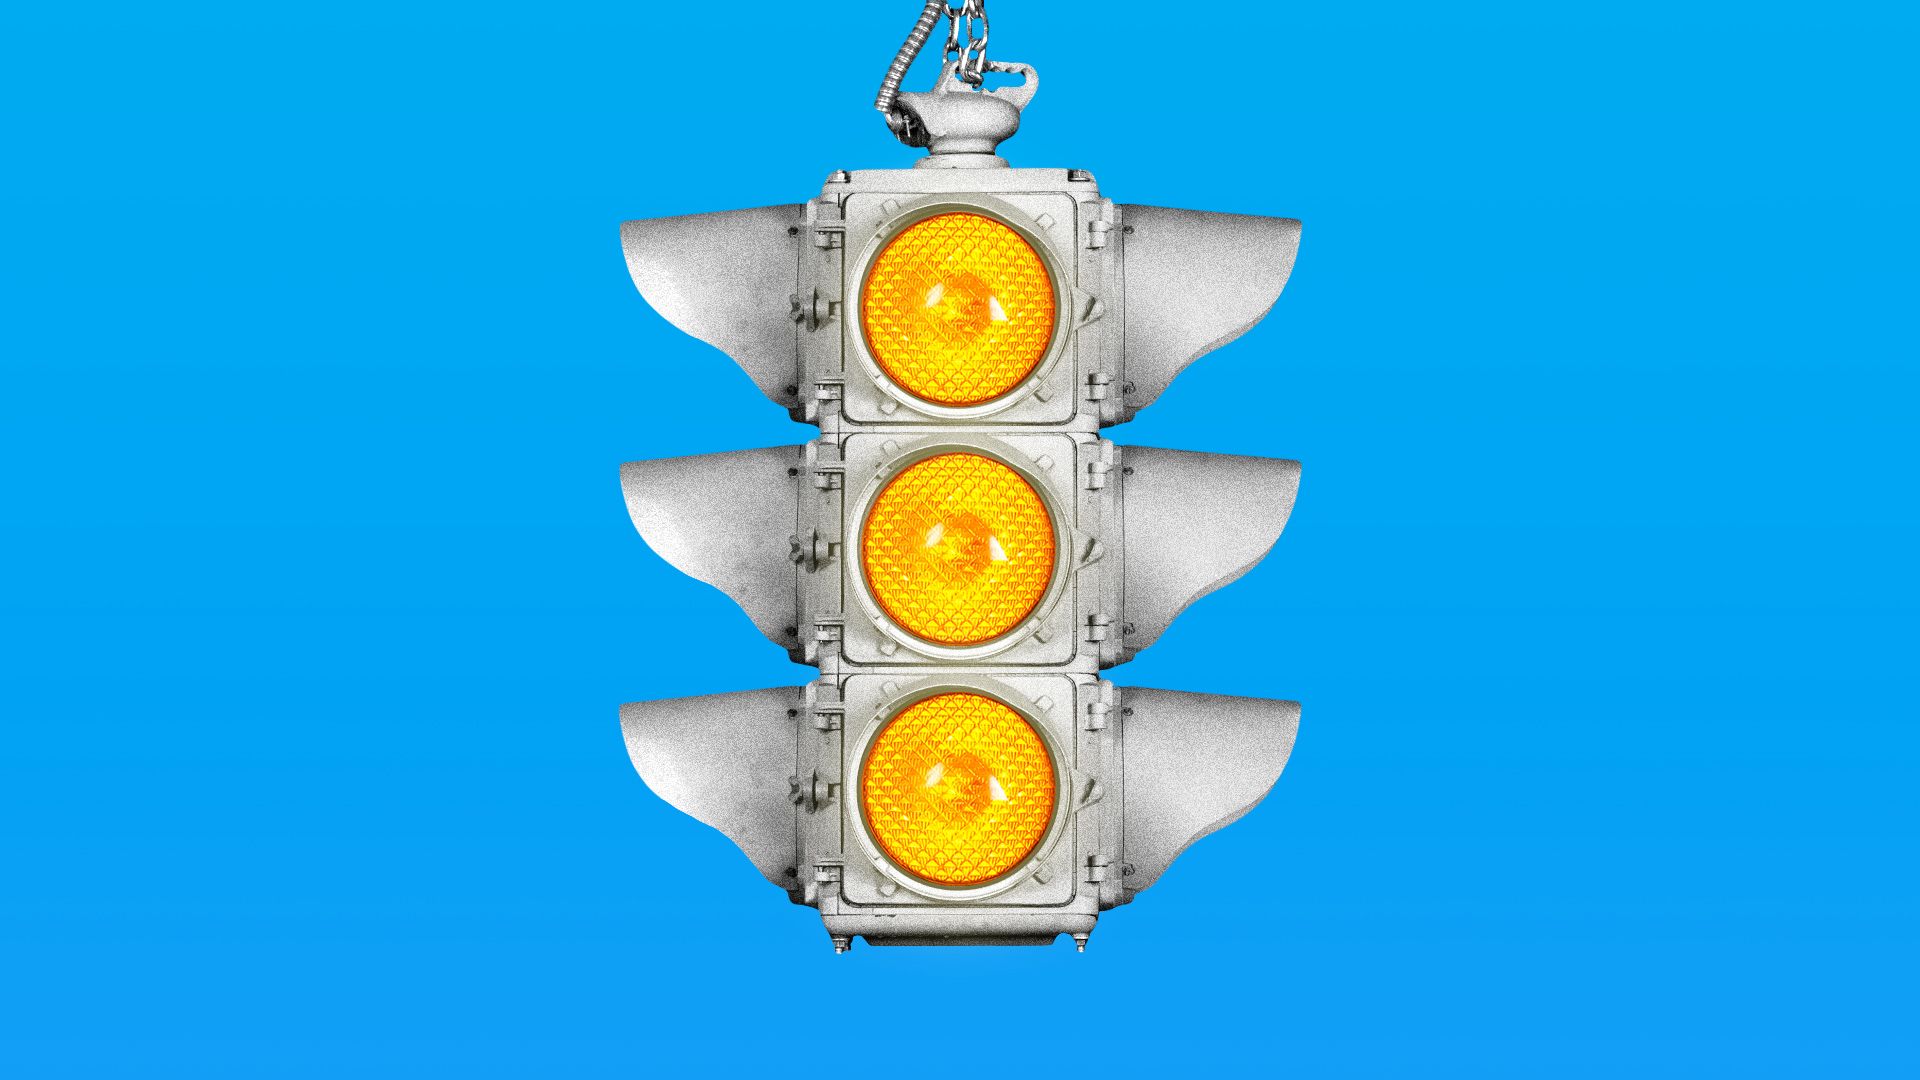 Illustration of a traffic light with all yellow lights. 